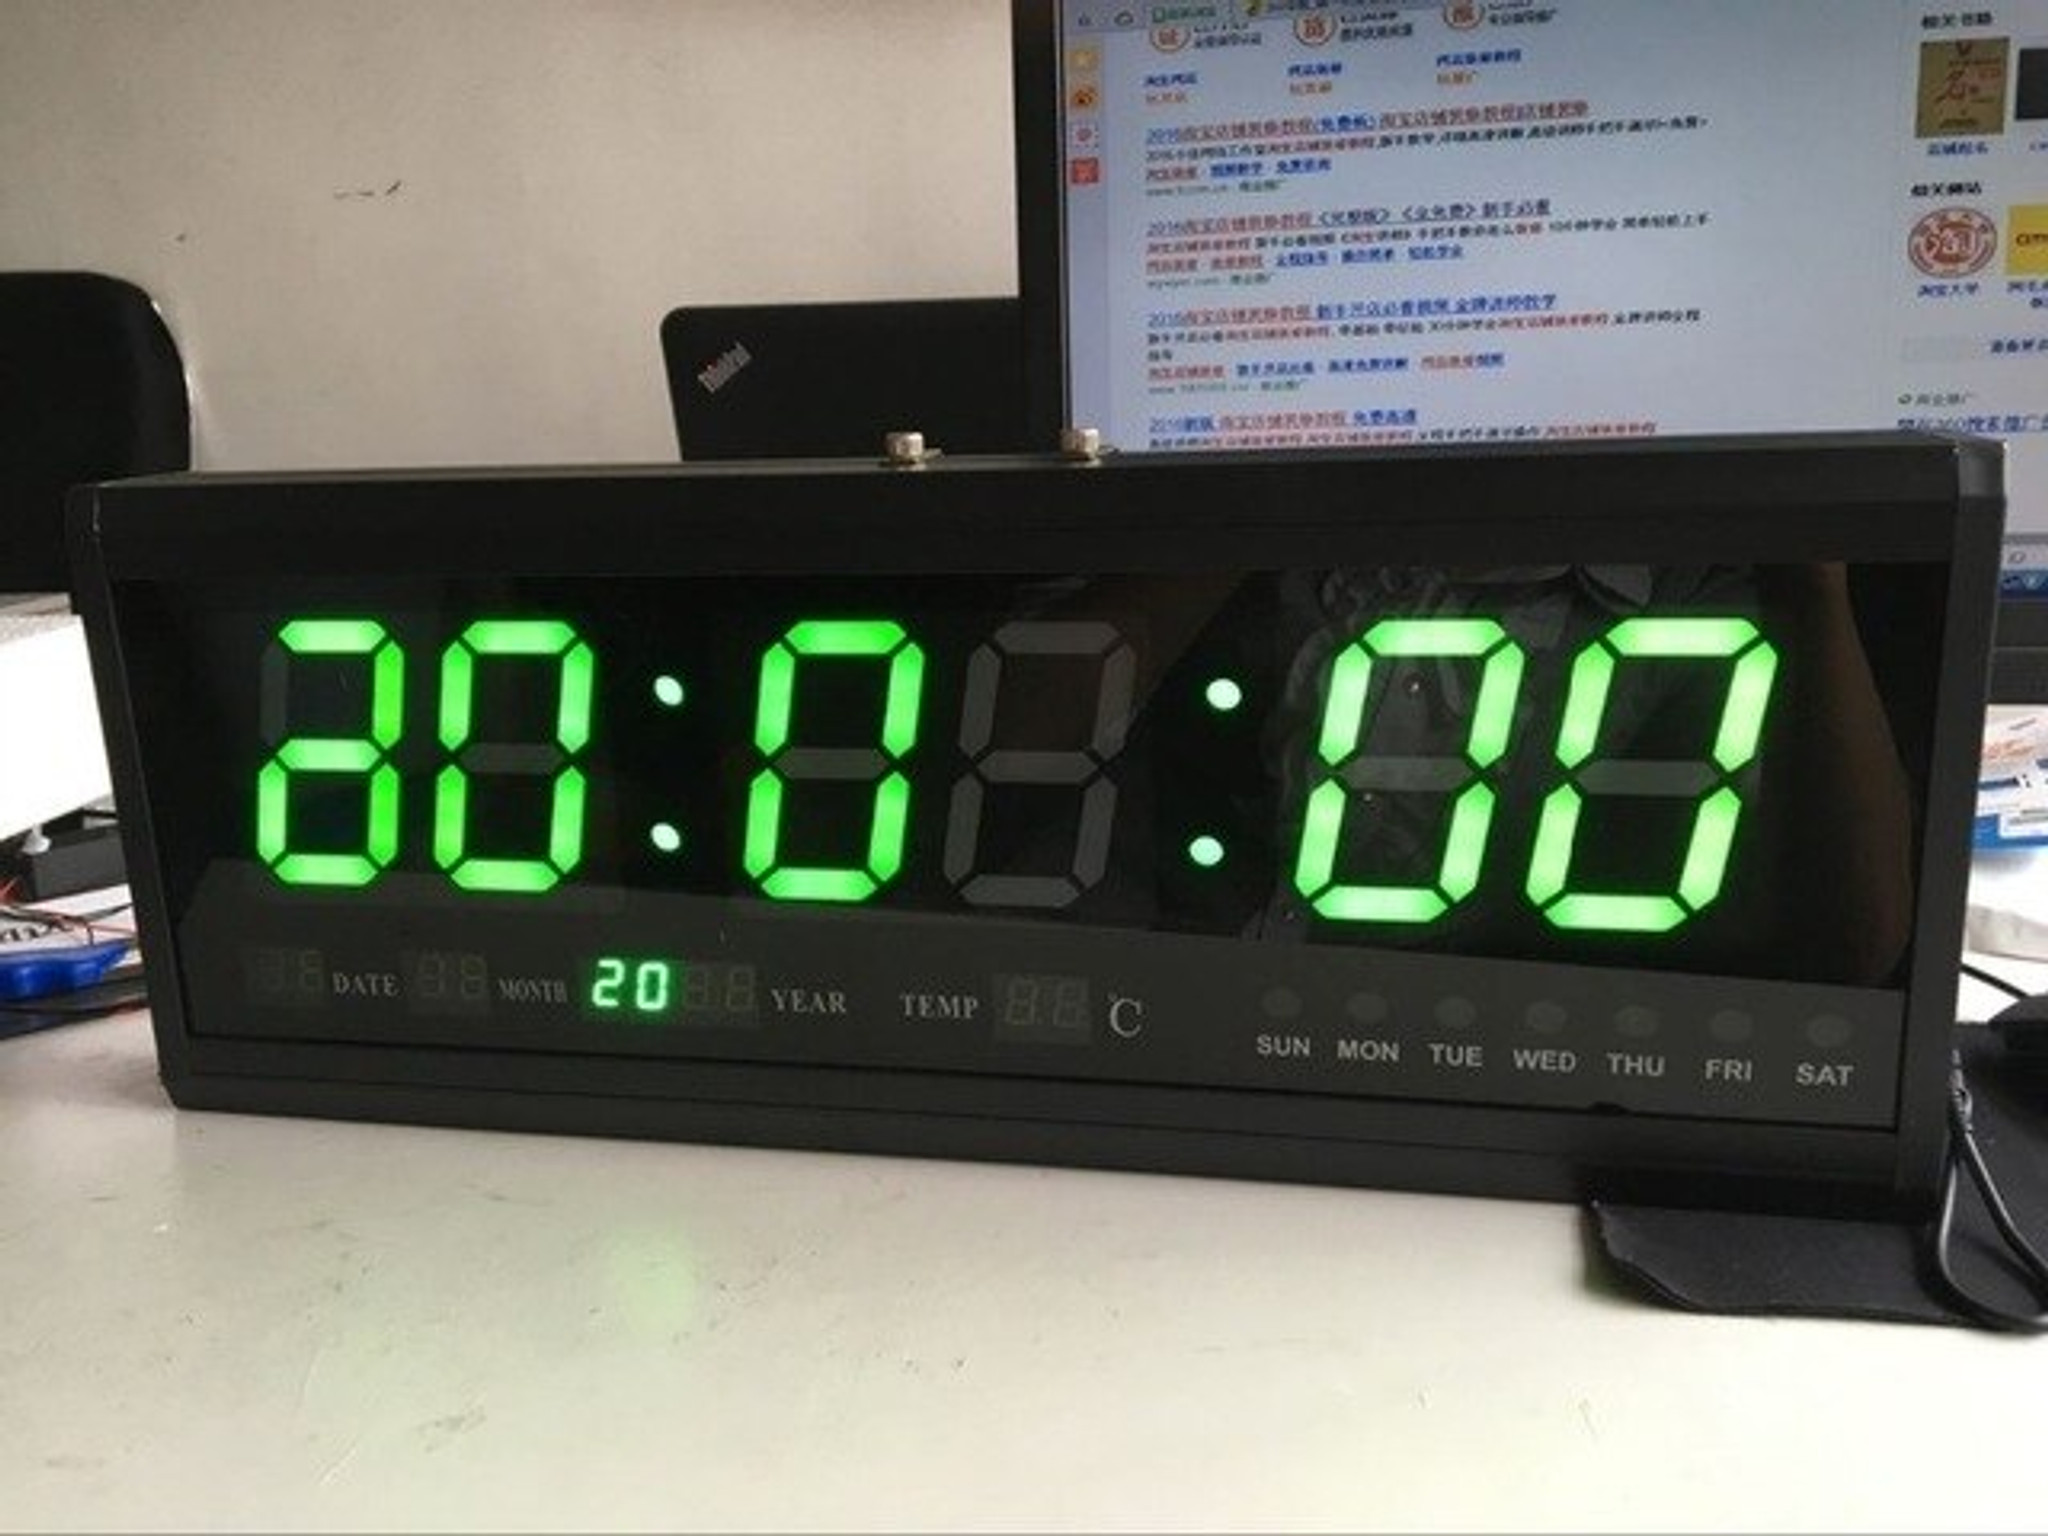 digital clock with weather